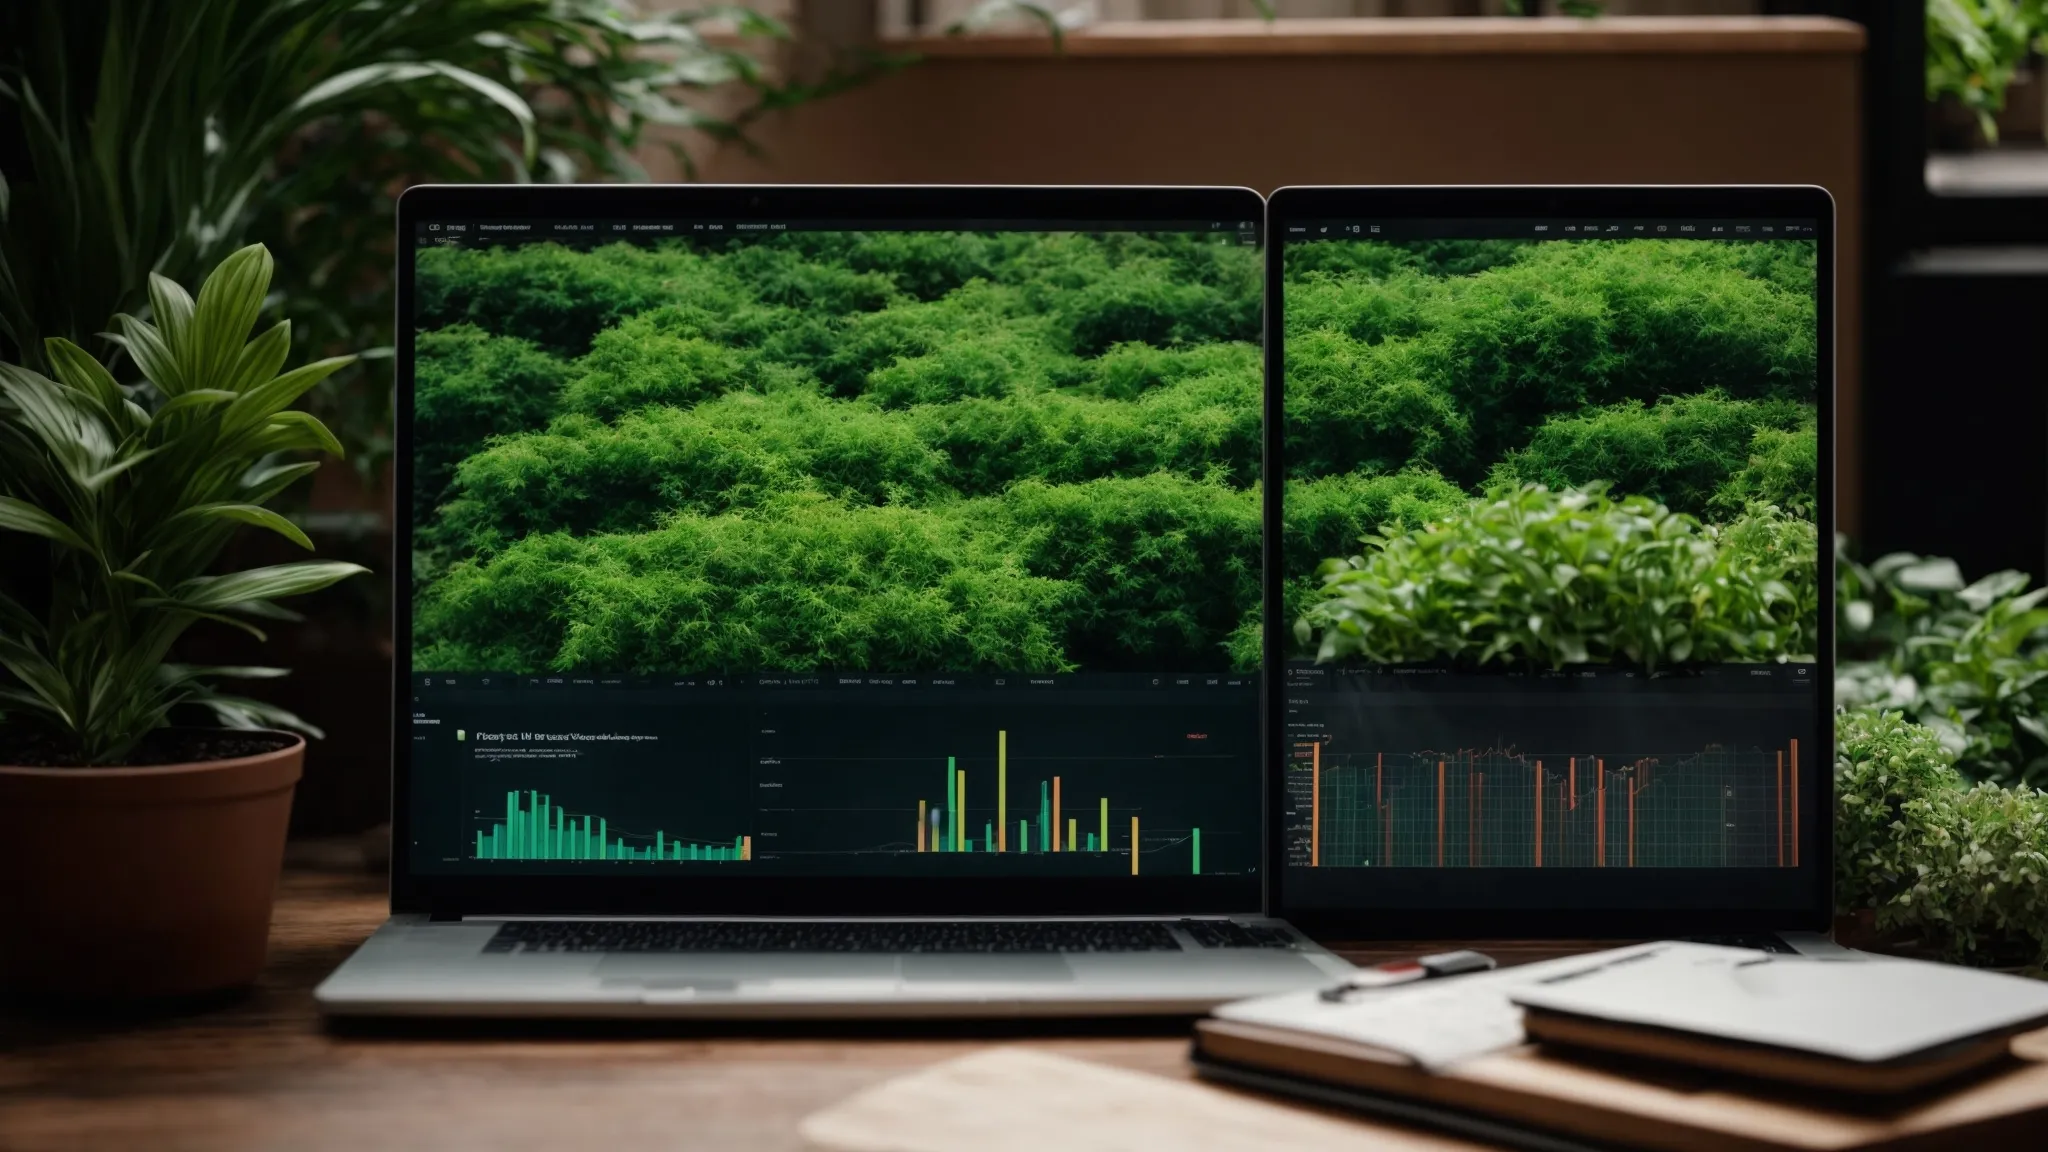 a laptop with analytics graphs on the screen placed on a wooden desk surrounded by green potted plants suggests a focus on optimizing digital content.